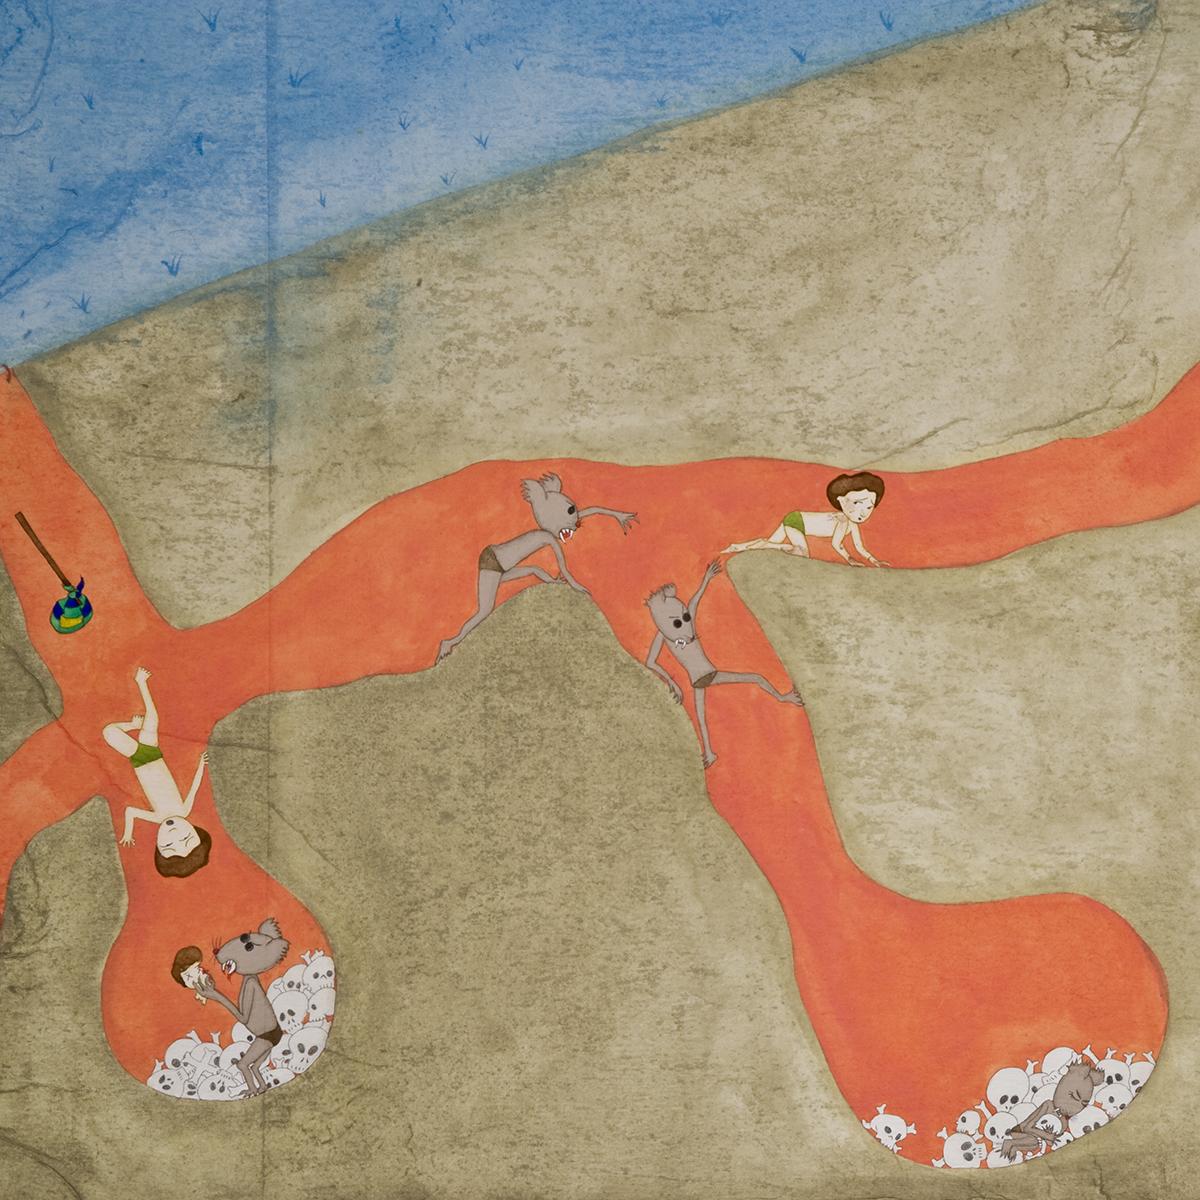 Detail of artwork by Kyung Jeon titled Chapter 2-The Boy and Girl in a Land of Ignorance, 2008, Gouache, graphite, watercolor on rice paper on canvas, 43.75 x 69.75 inches, 111.1 x 177.2 cm